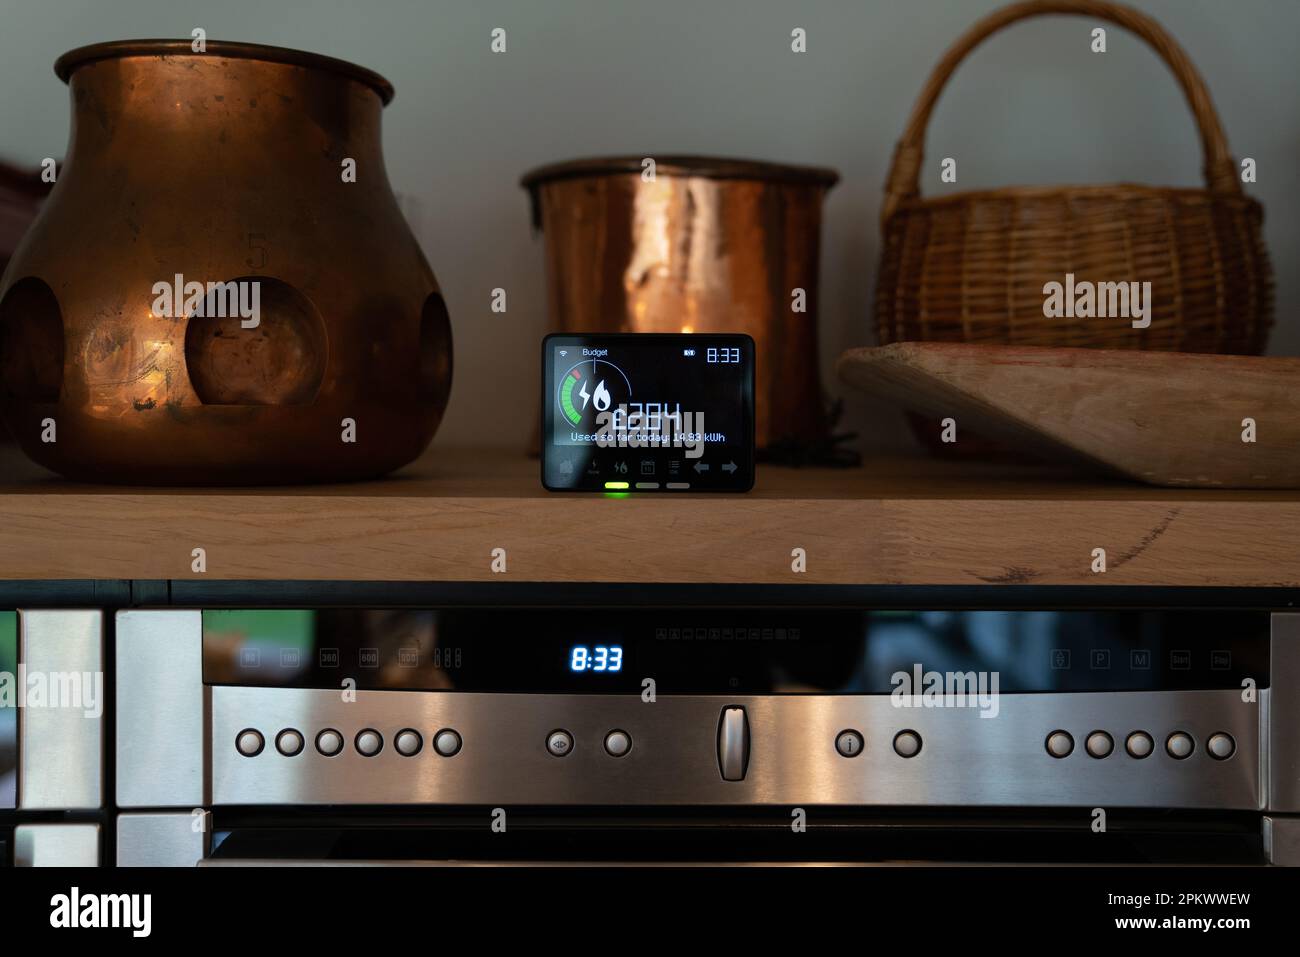 Gas and electricity energy use smart meter in kitchen of a home in England, UK. Stock Photo